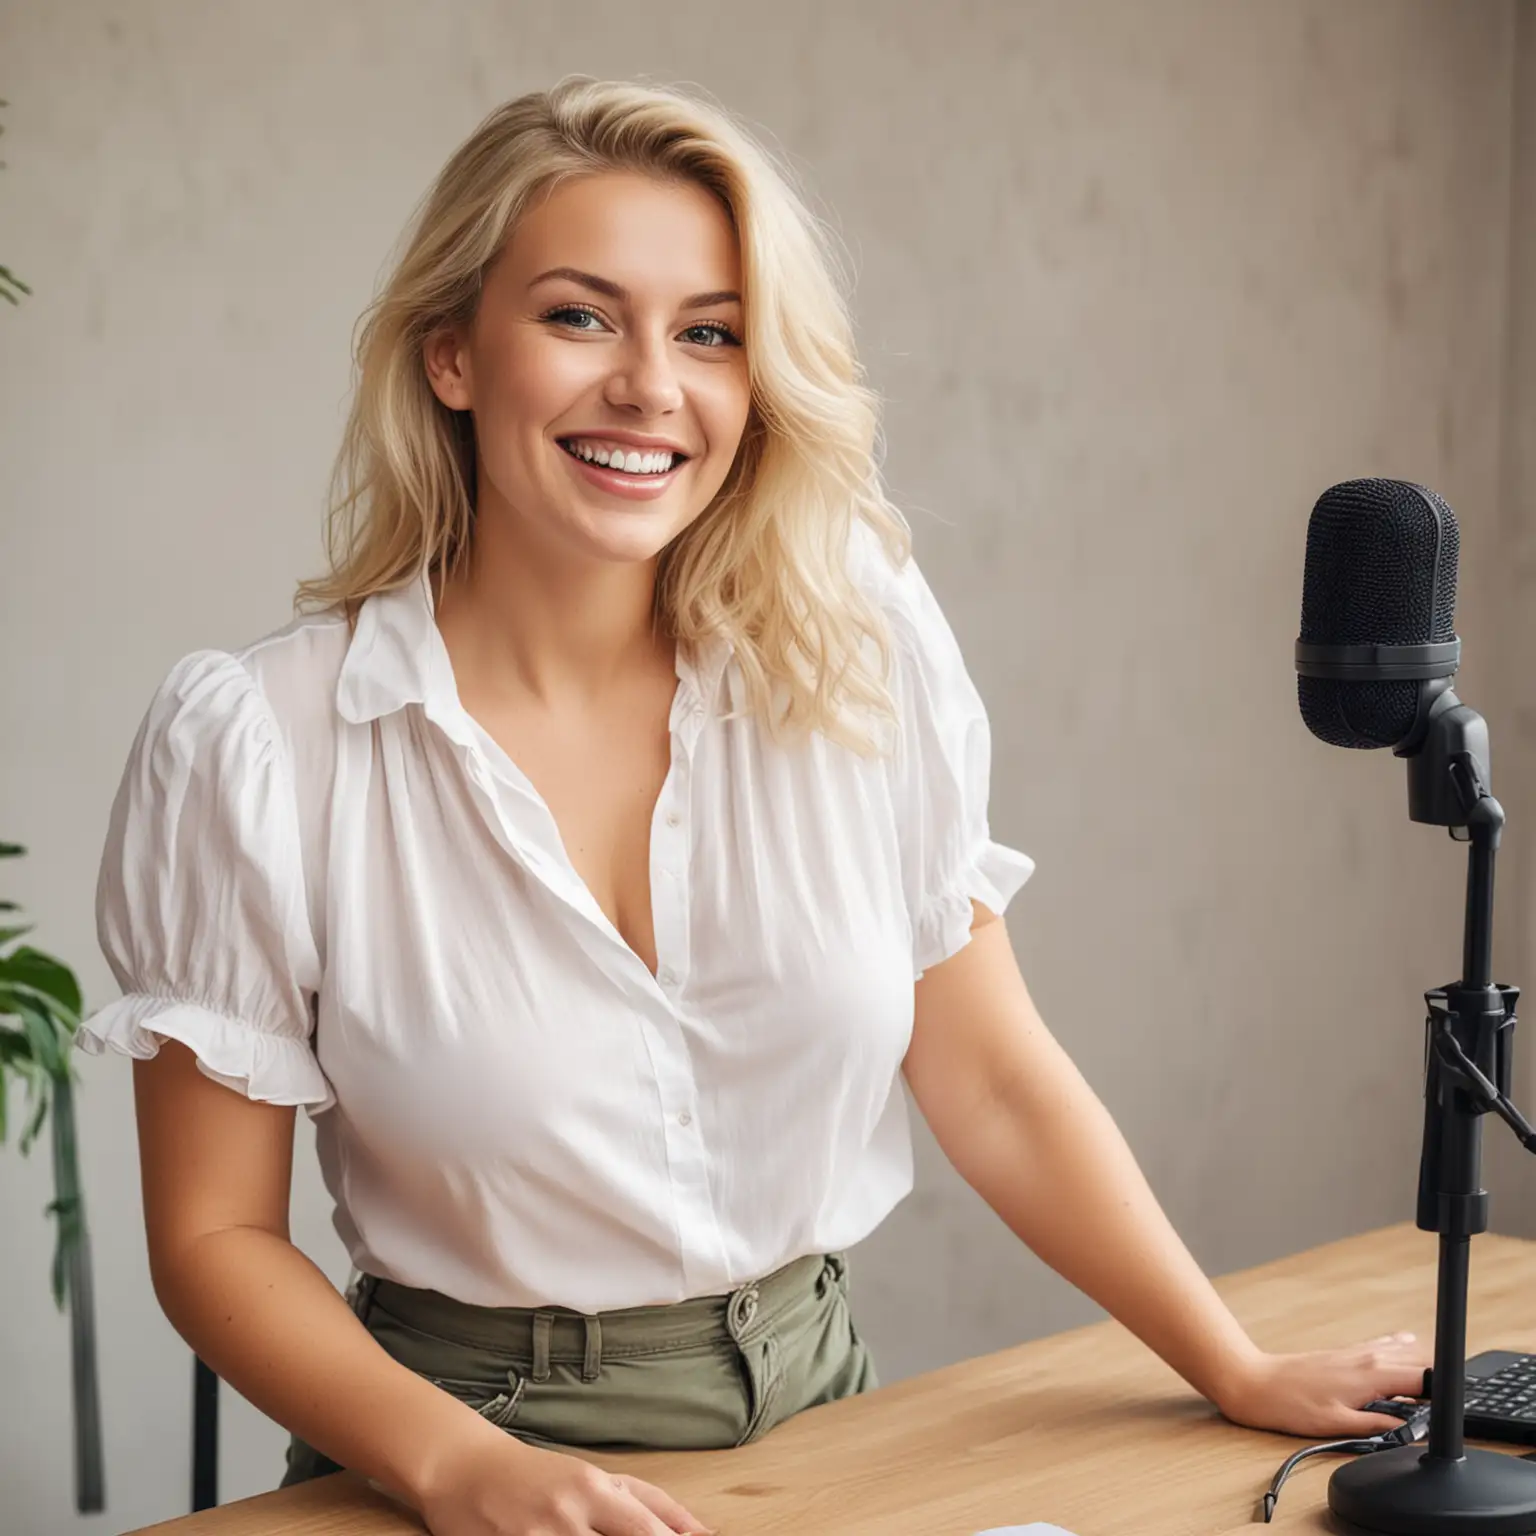 polish woman , blond hair smiling, large natural breasts, wearing a WHITE BLOUSE and shorts talking into a microphone on her desk

